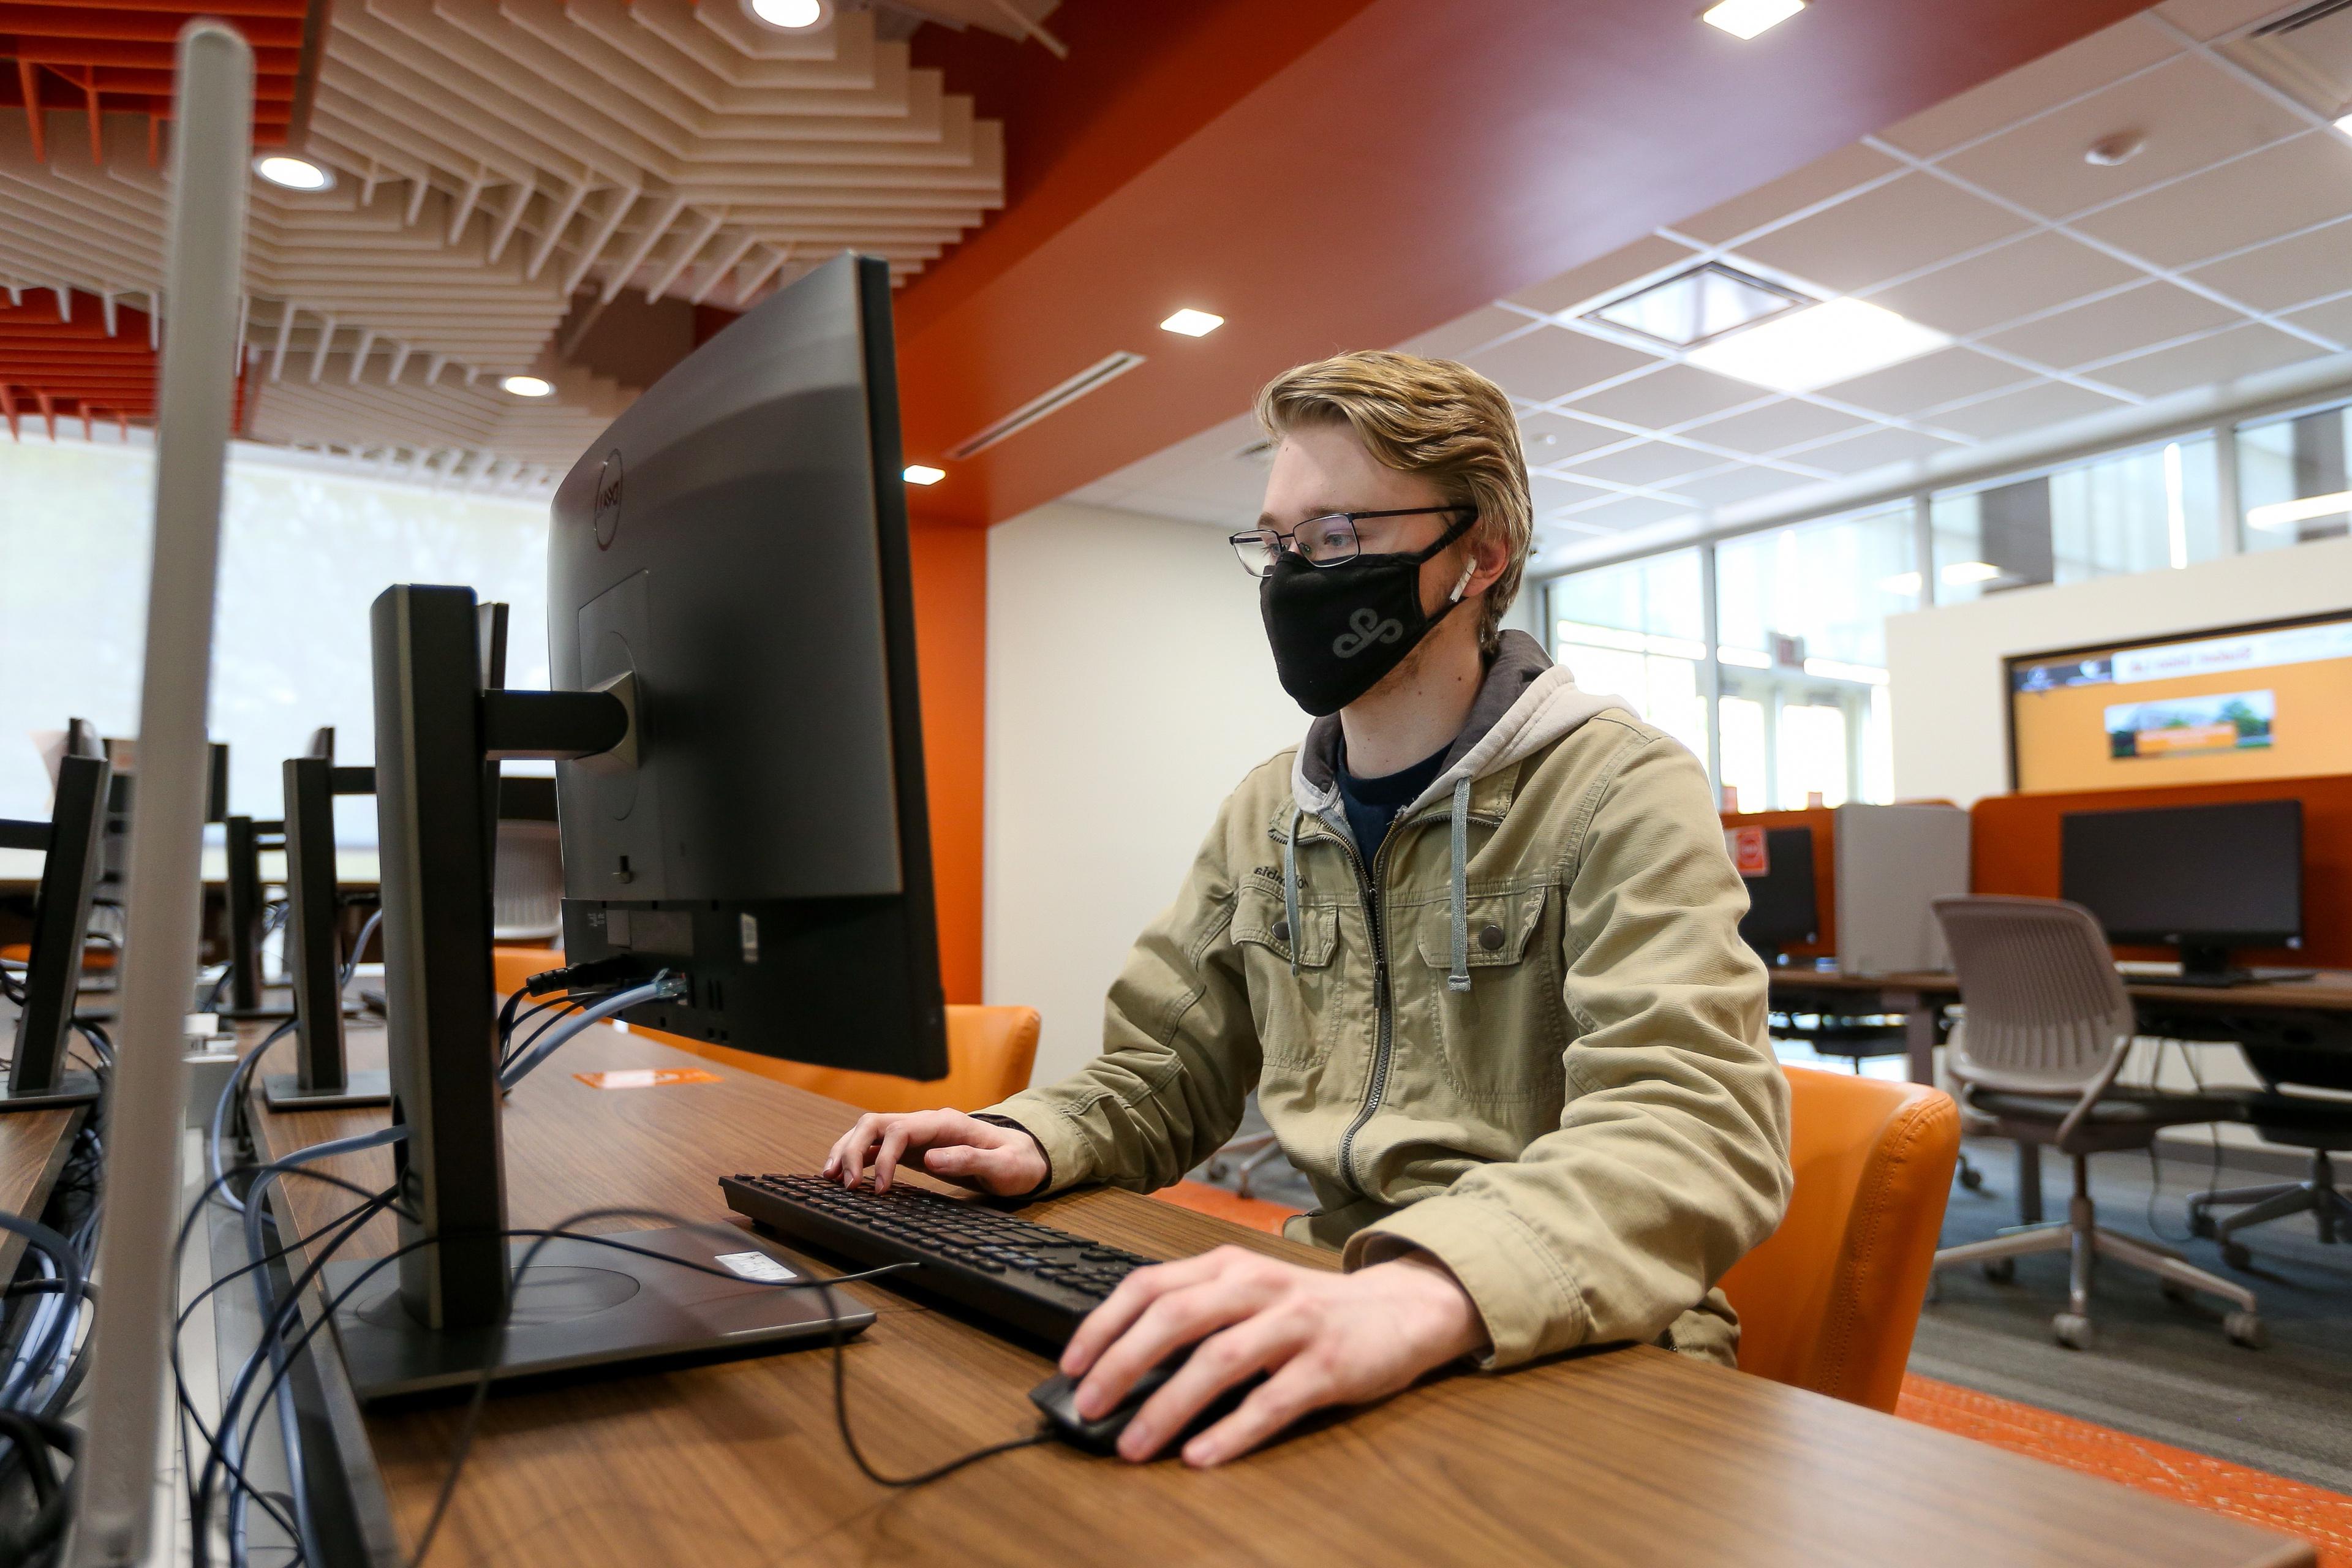 BGSU’s computer labs are modern, quiet and well equipped, with network simulation, servers and air-gapped machines for testing.